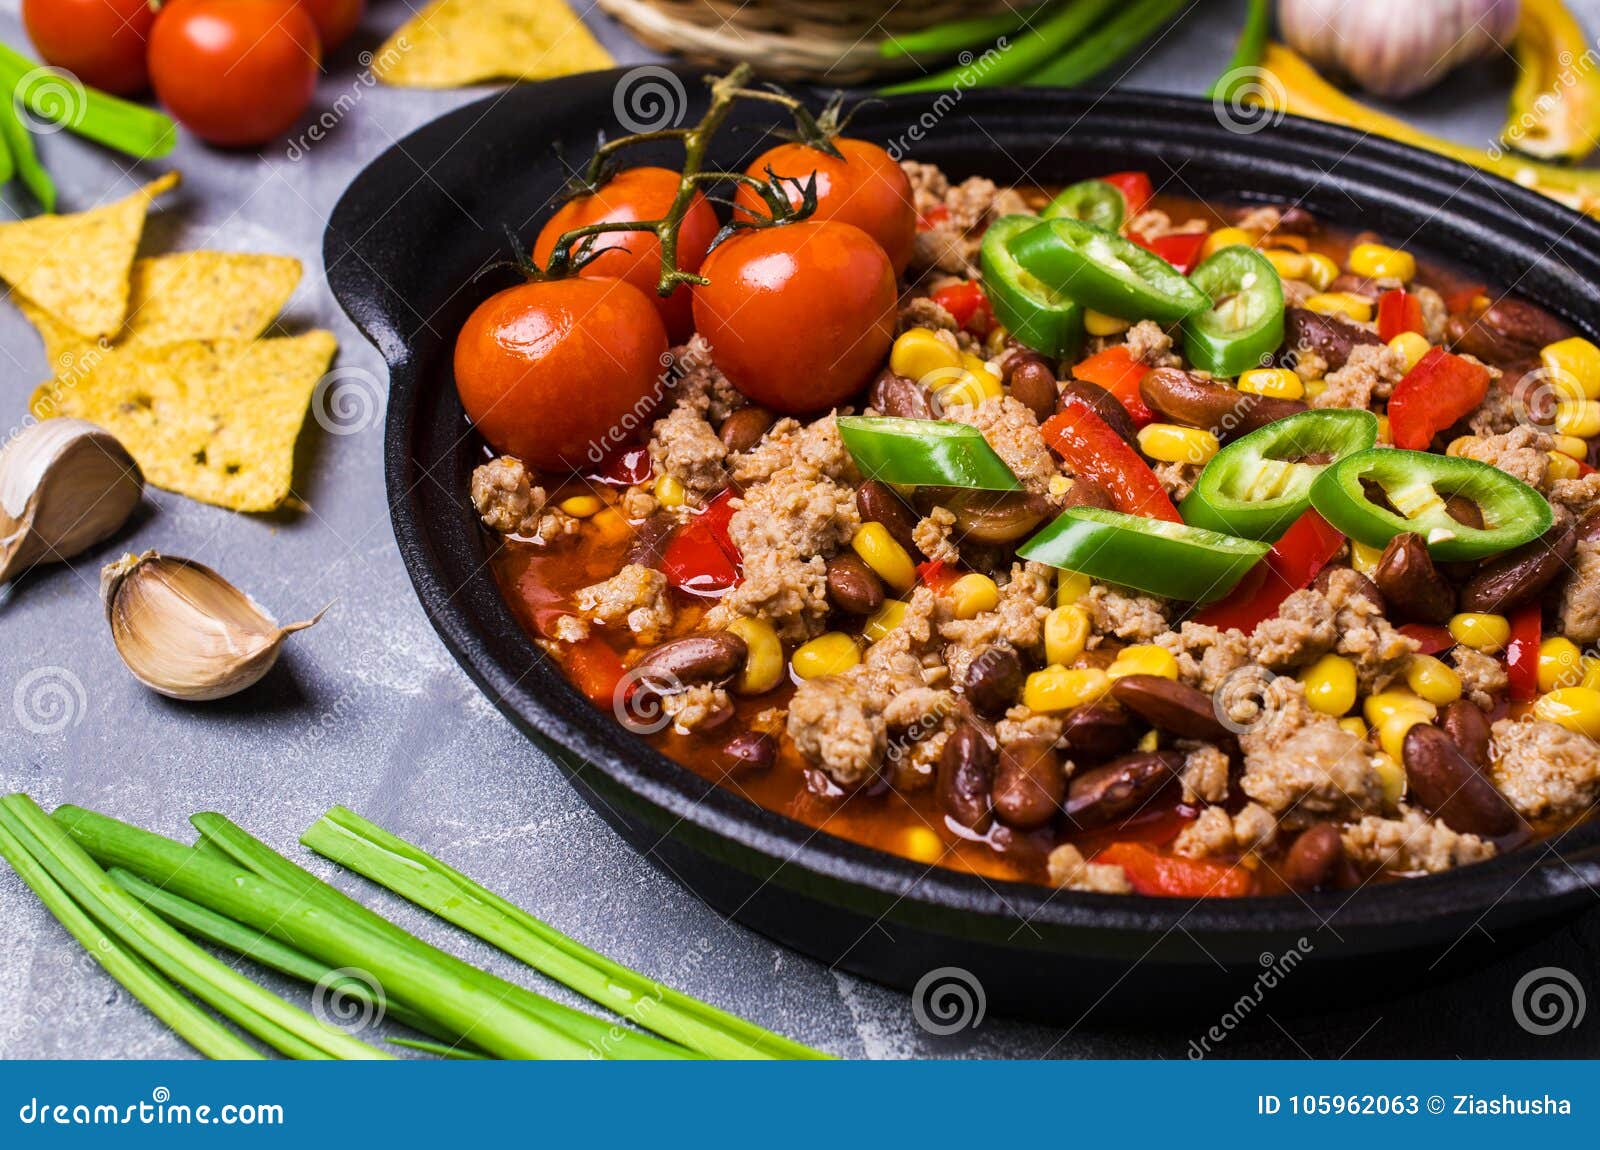 Traditional Mexican Chili Concarne Stock Image - Image of bread, onions ...